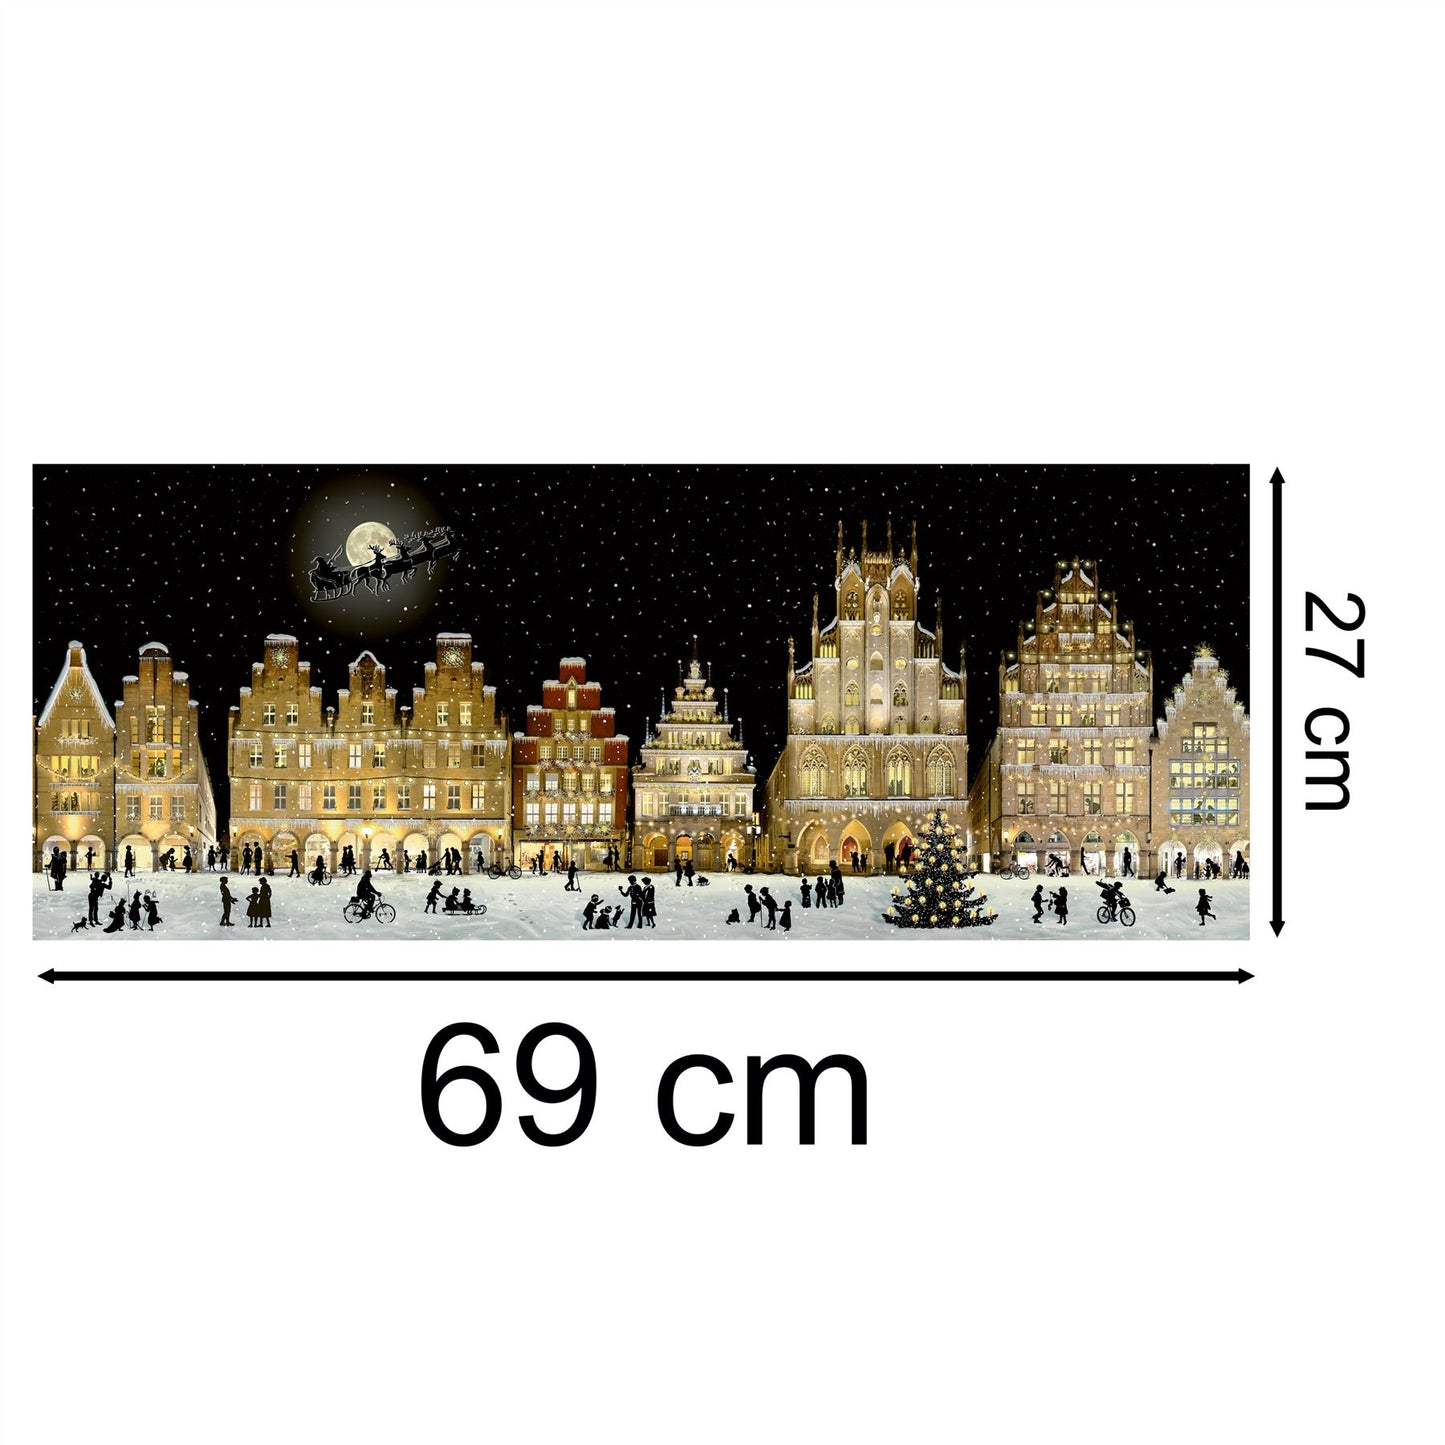 Large Christmas Advent Calendar Christmas Town At Night Picture Advent Calendar